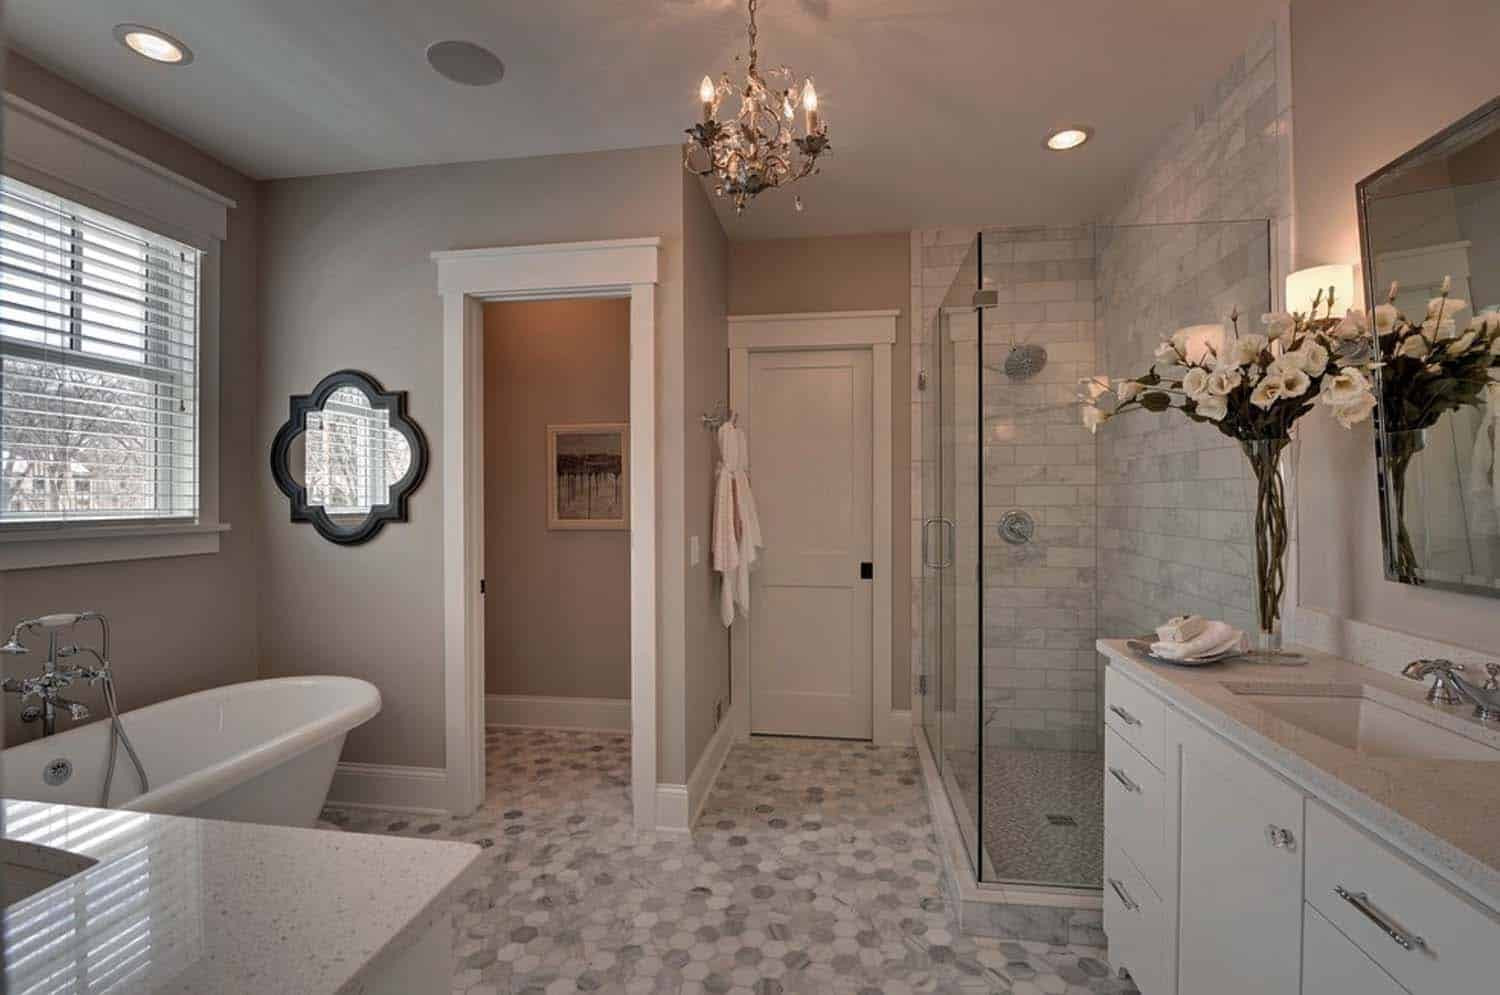 Bathroom Design Pictures
 53 Most fabulous traditional style bathroom designs ever